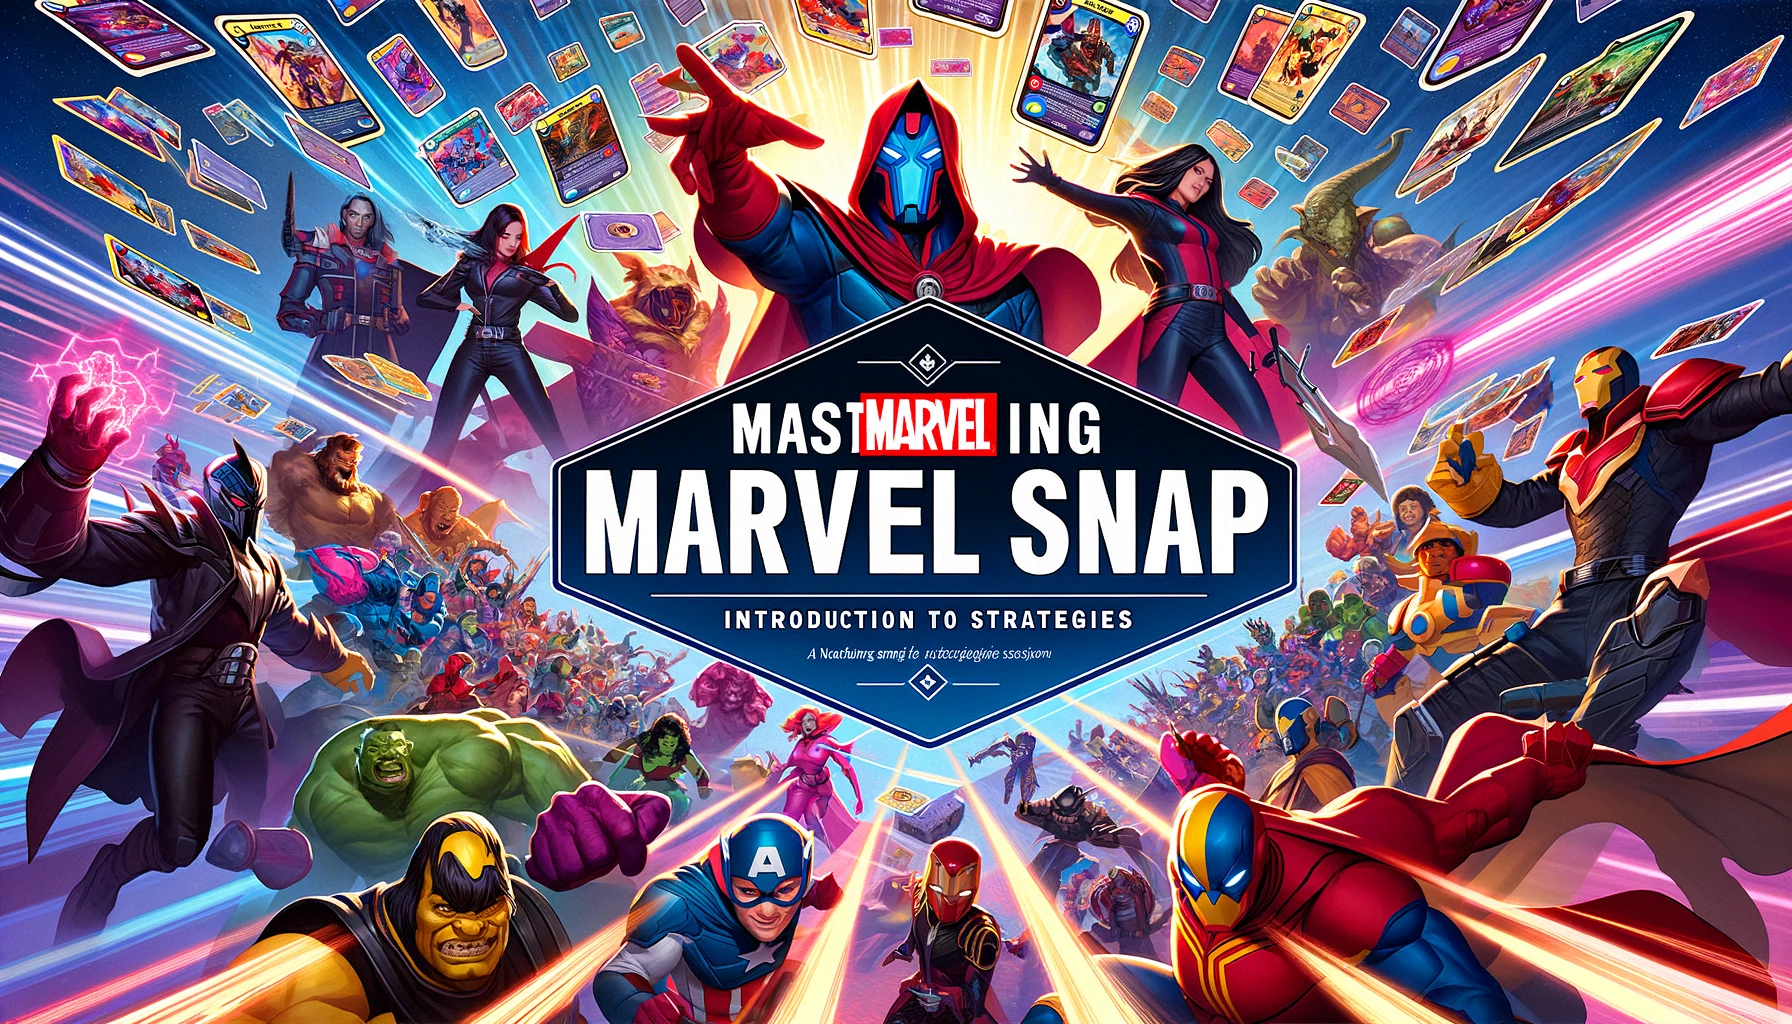 Wide-format illustration for the introductory section of the article series "Mastering Marvel Snap: Introduction to Strategies," featuring Marvel Snap characters in dynamic poses with a background of Marvel Snap card elements and strategic game motifs.